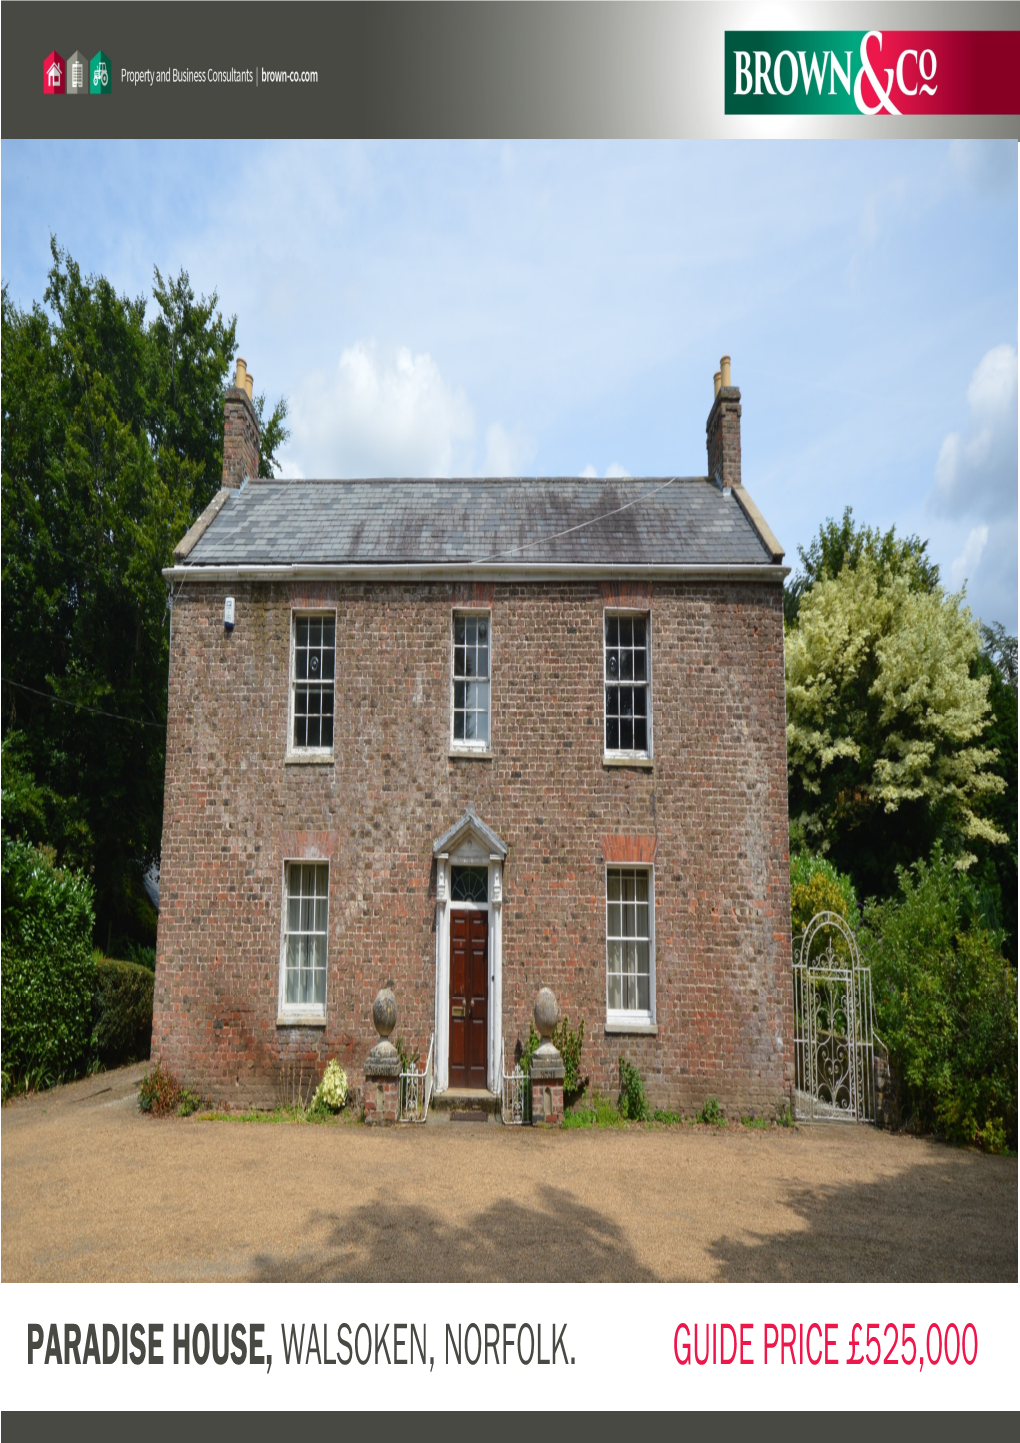 Guide Price £525,000 Paradise House, Walsoken, Norfolk